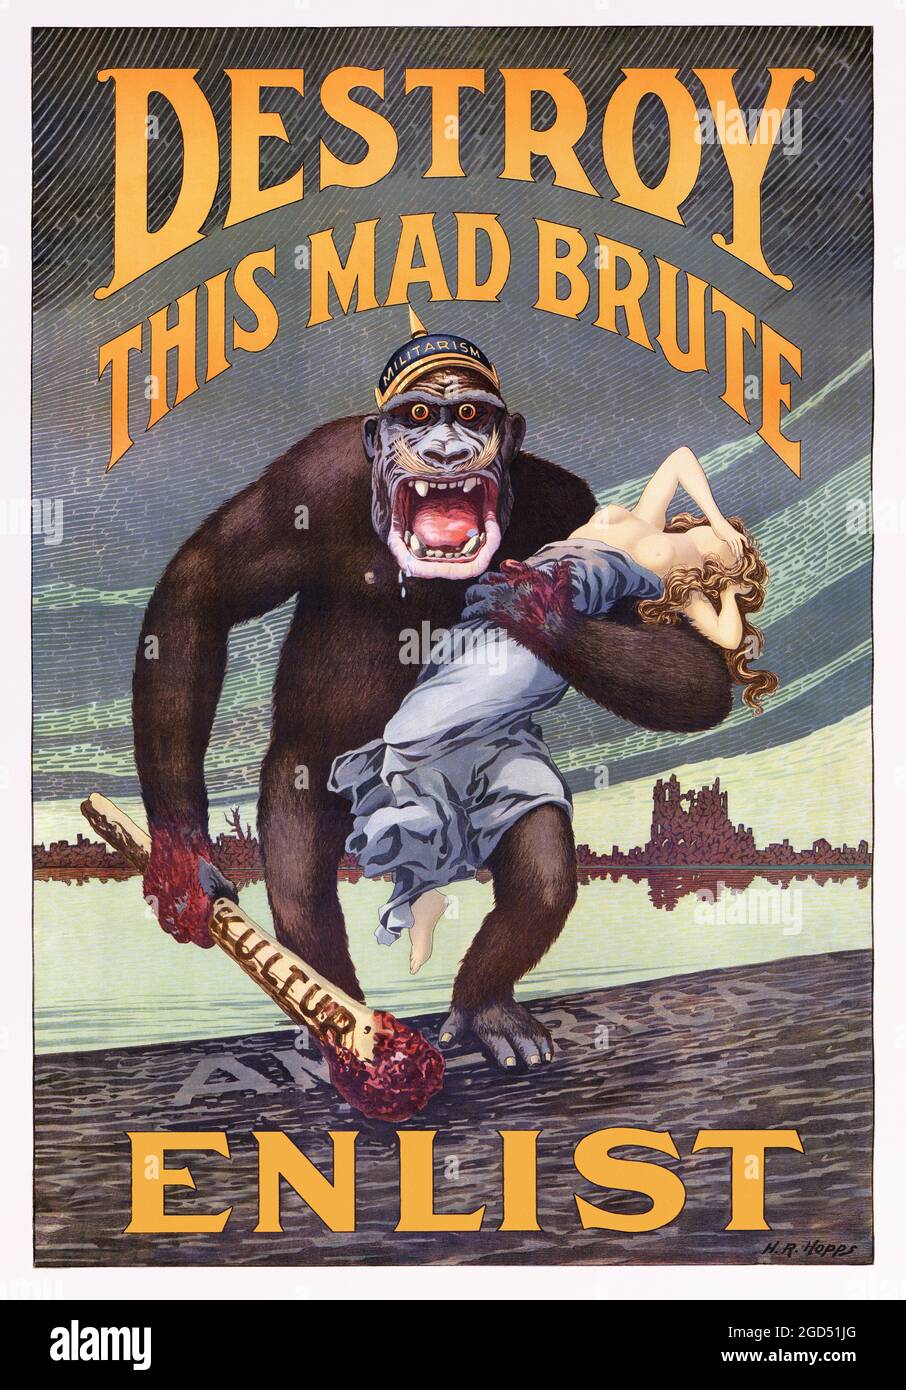 Destroy this mad brute Enlist - U.S. Army - Old and vintage propaganda / recruitment poster. 1917. Retouched version. Stock Photo